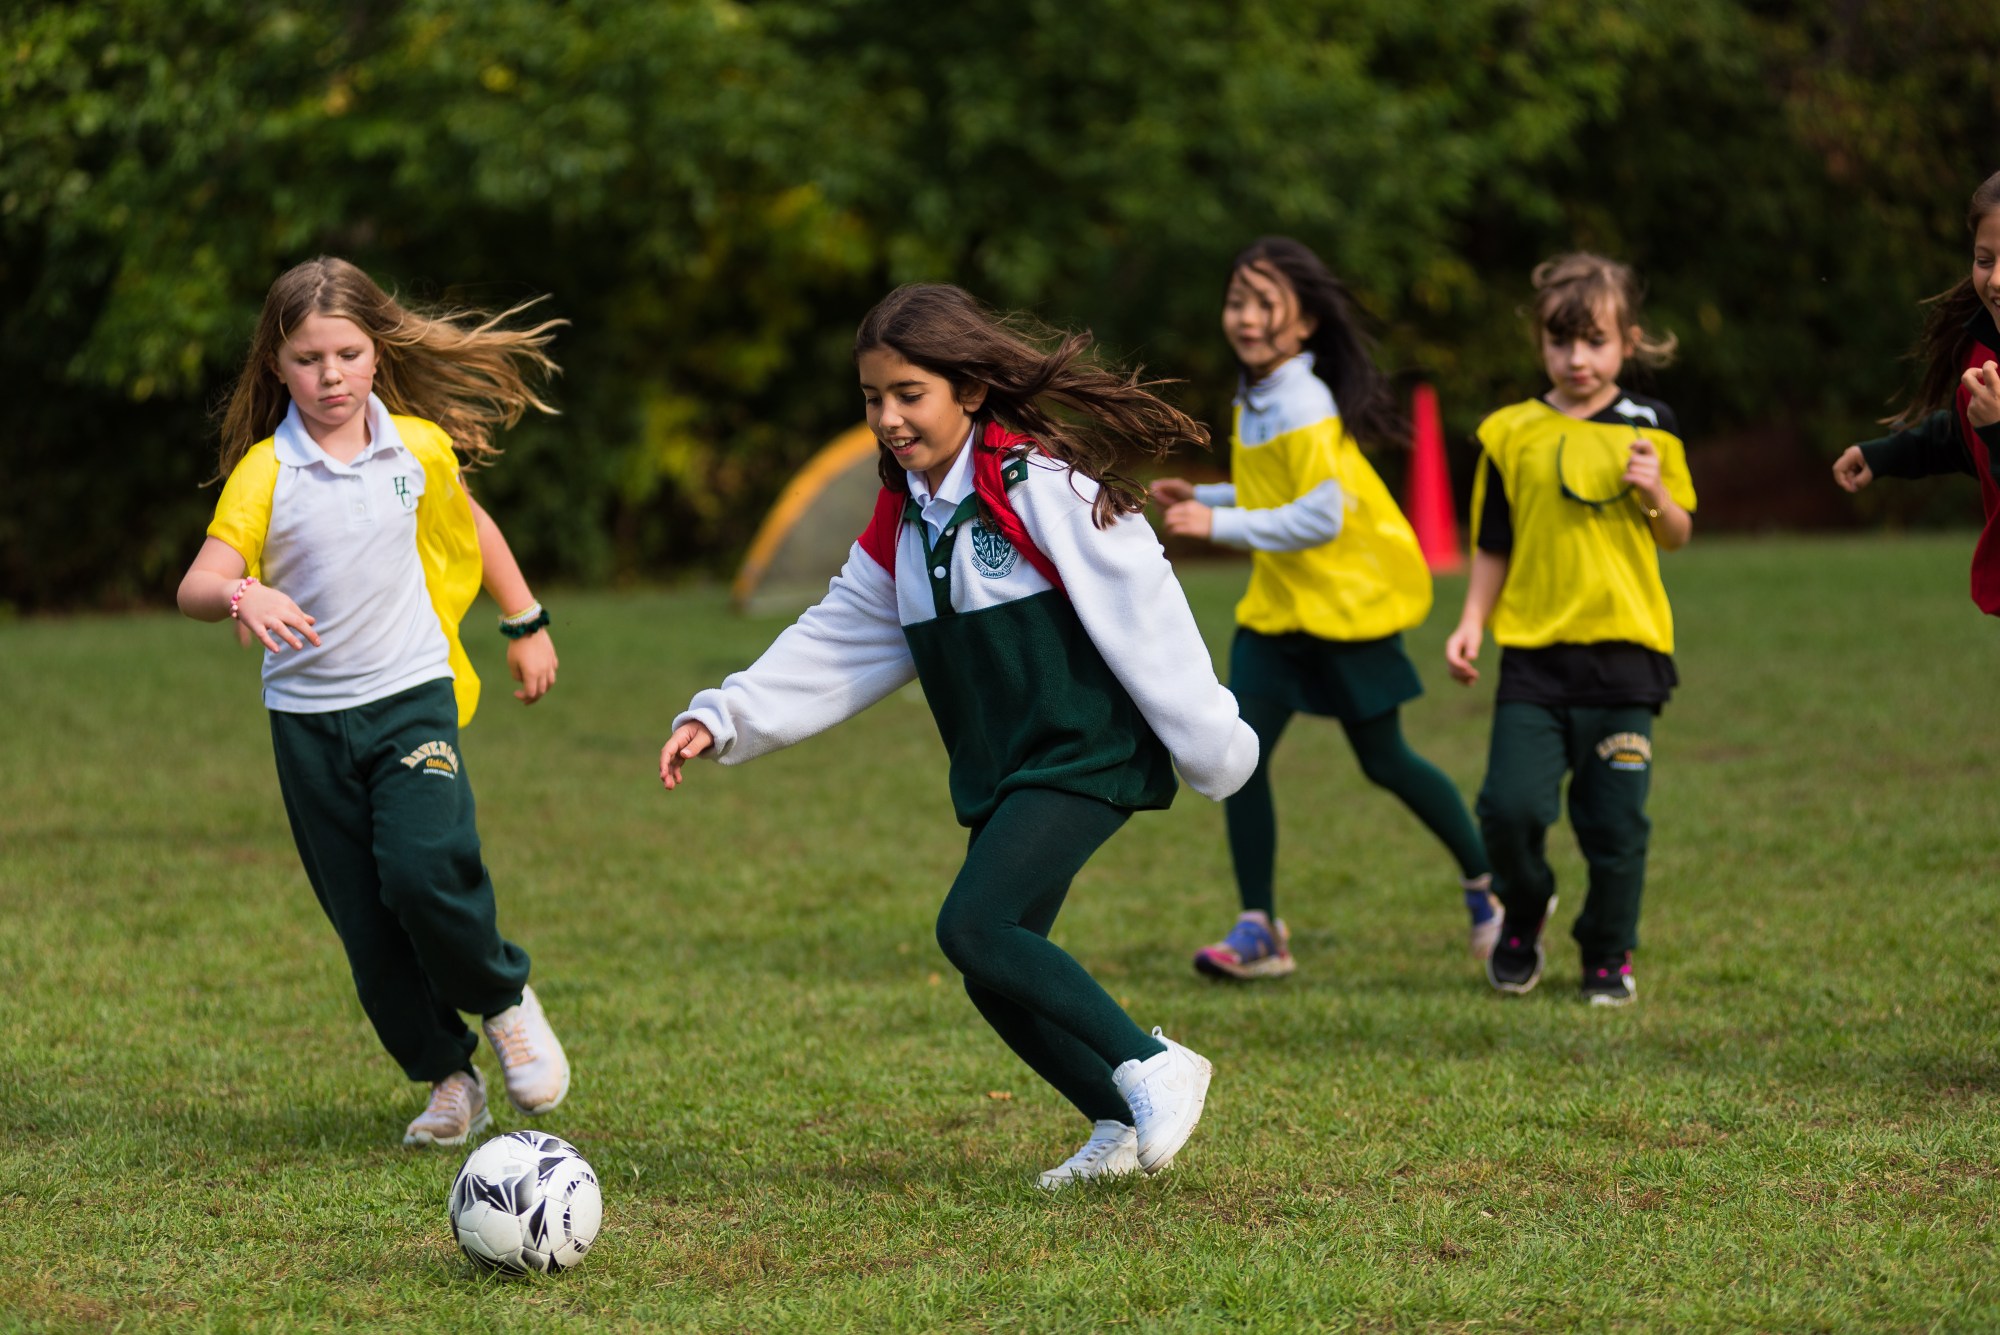 Junior School students playing soccer.